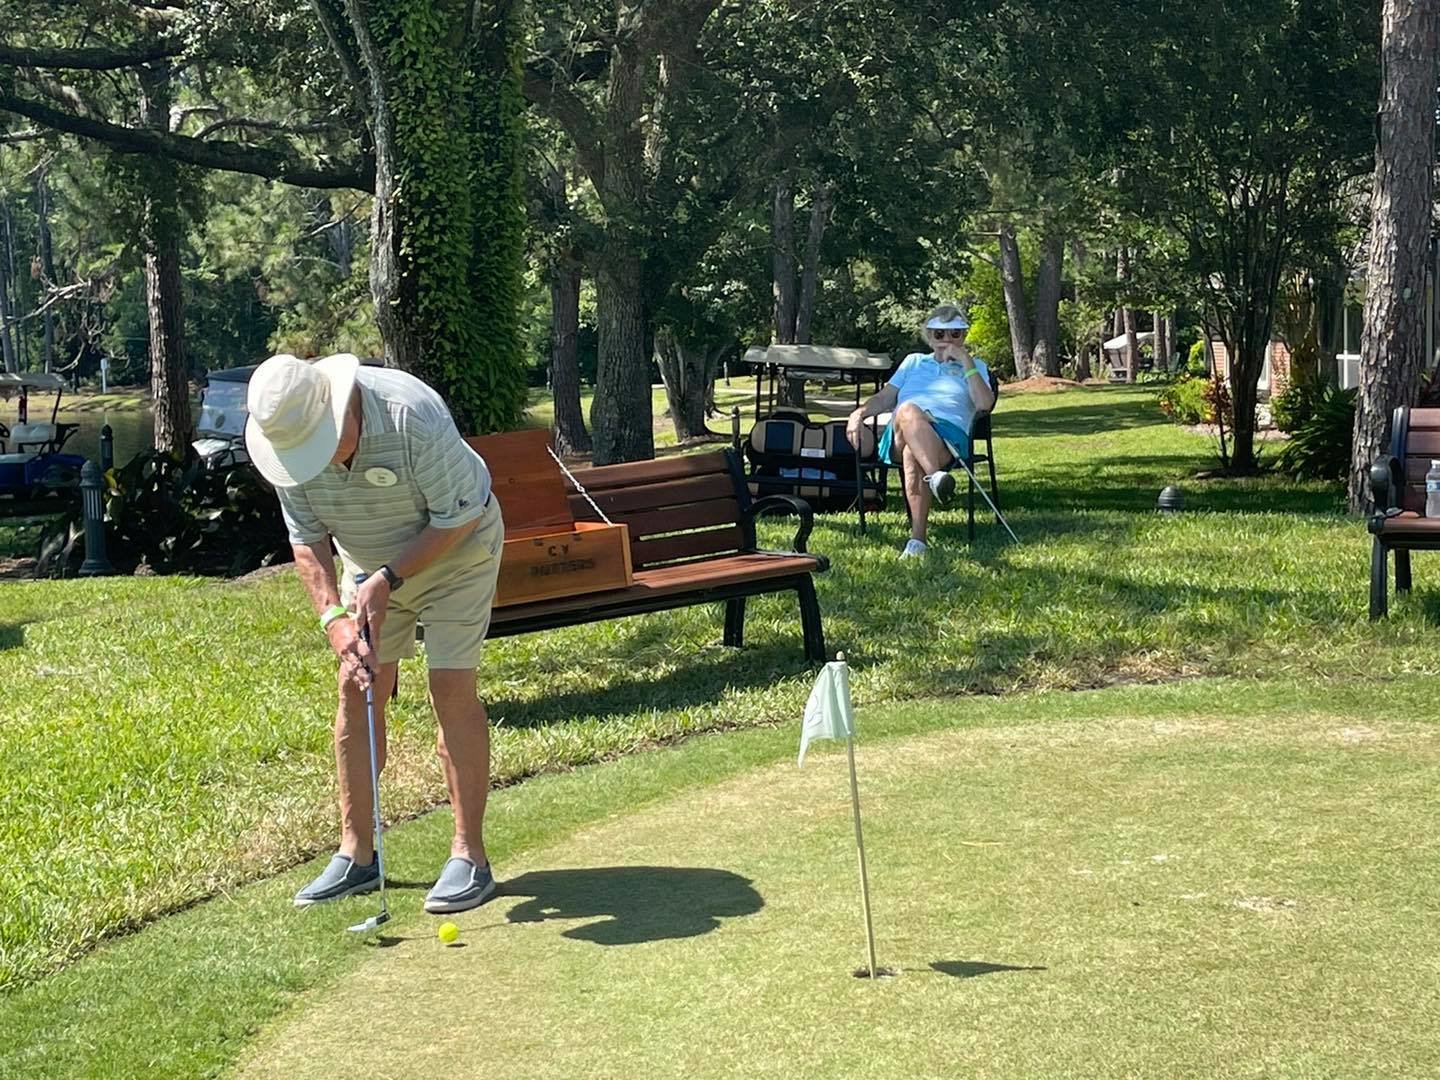 A participant makes a shot during the Putters Tournament at Cypress Village.